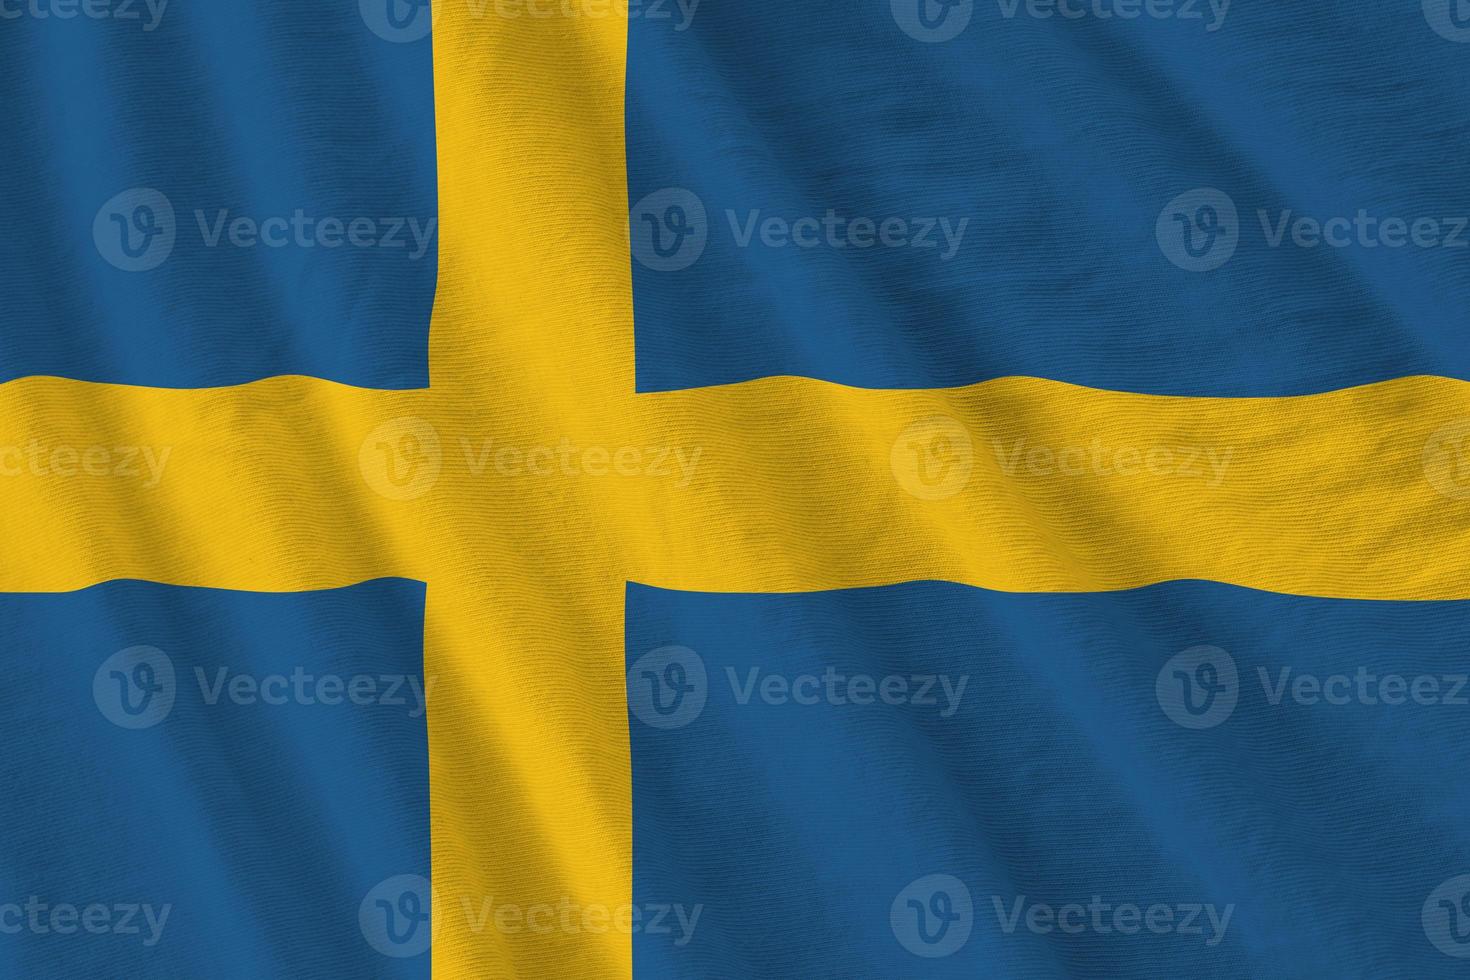 Sweden flag with big folds waving close up under the studio light indoors. The official symbols and colors in banner photo